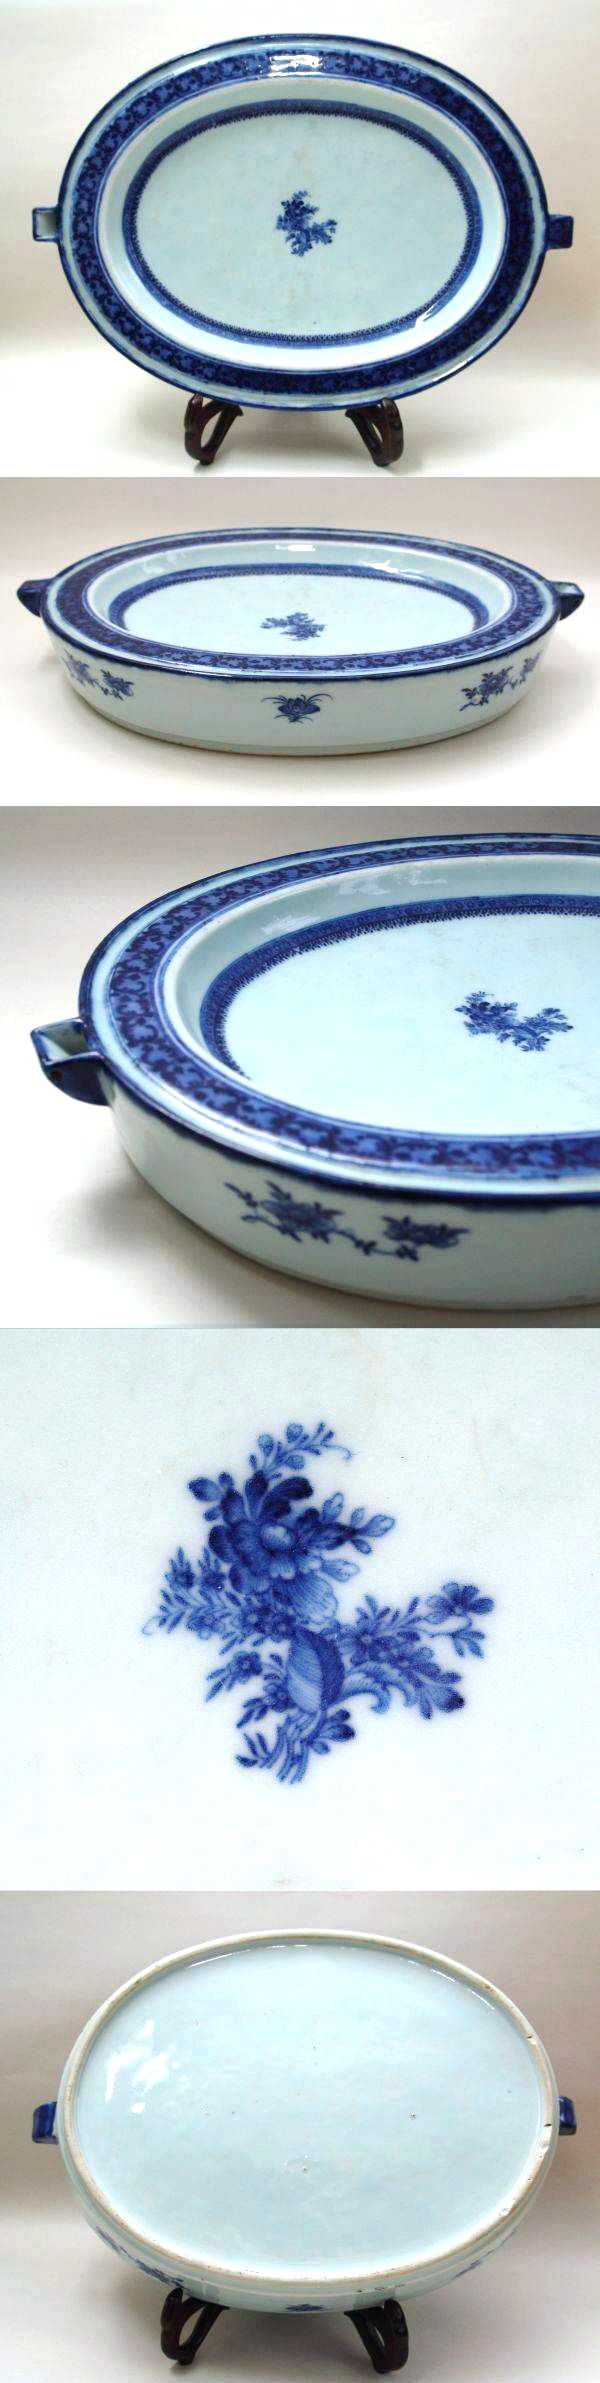 Large hot water dish
in underglaze blue
and white
decoration, Qianlong
period (1736-1795)